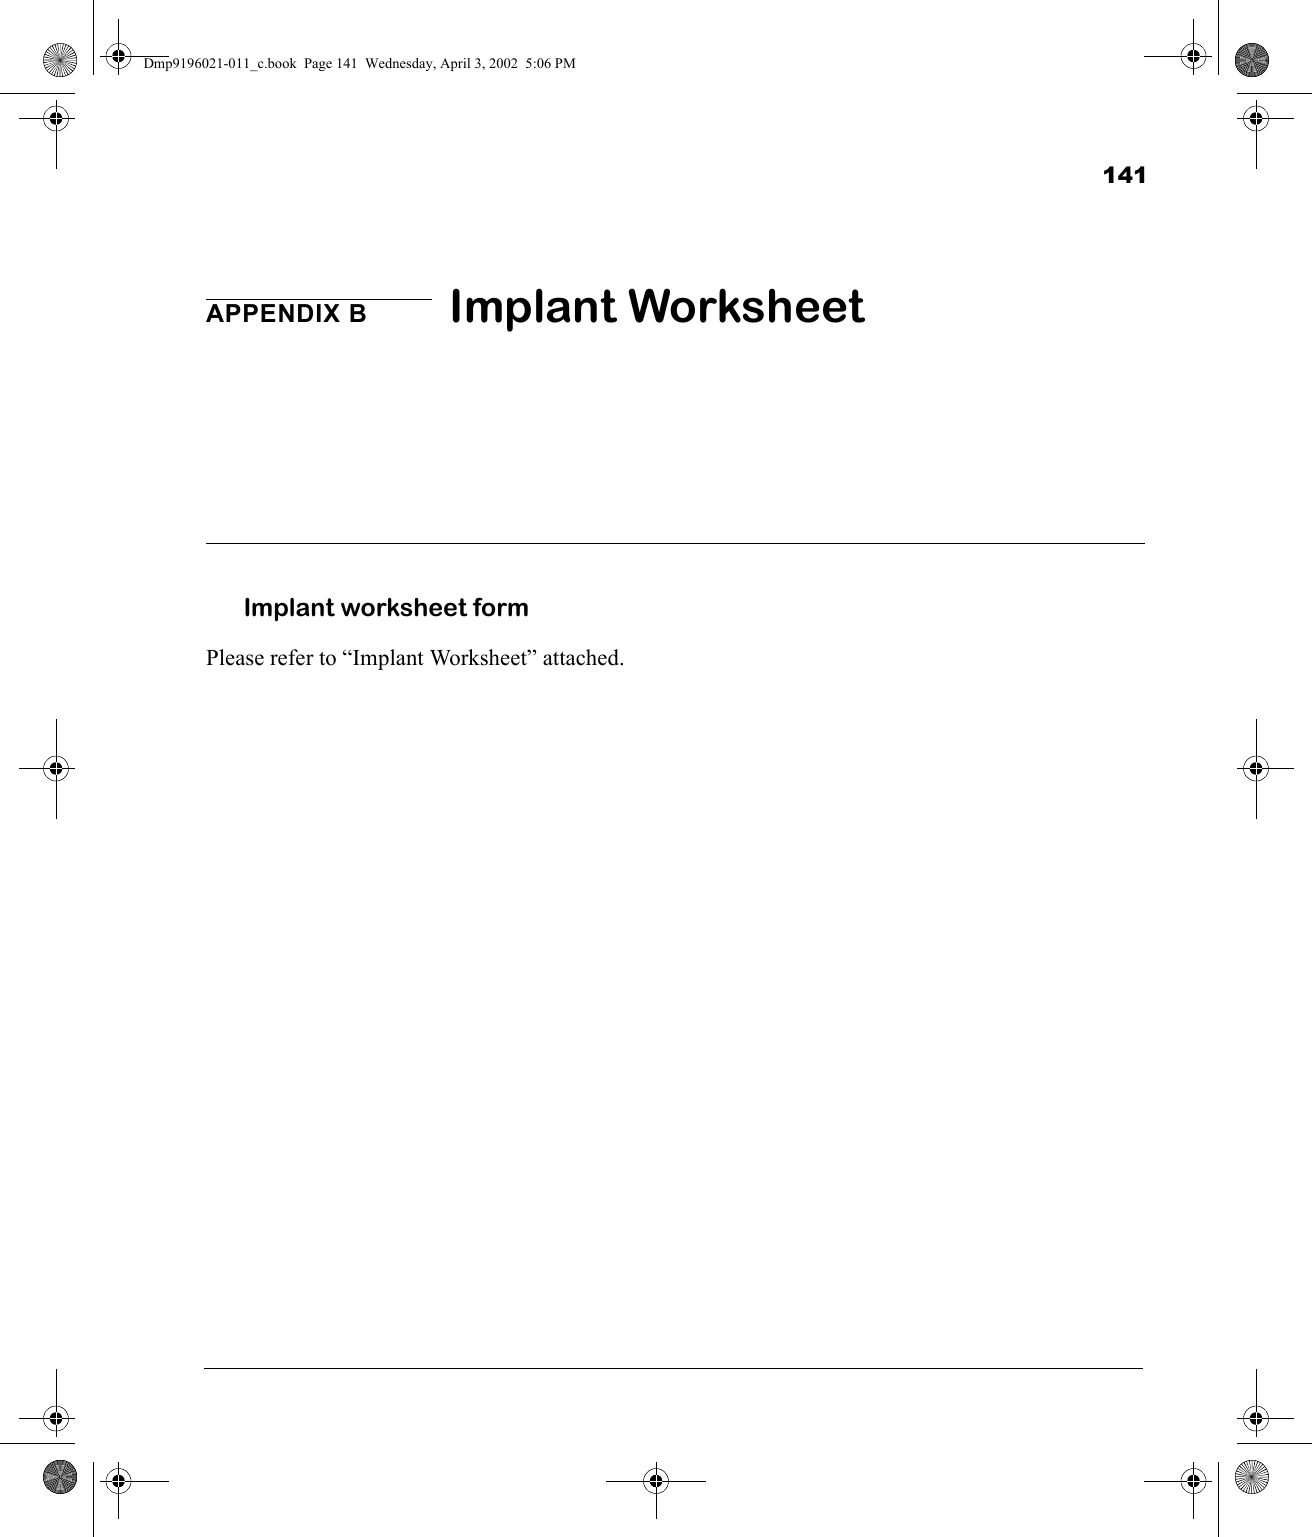 141APPENDIX B Implant WorksheetImplant worksheet formPlease refer to “Implant Worksheet” attached.Dmp9196021-011_c.book  Page 141  Wednesday, April 3, 2002  5:06 PM